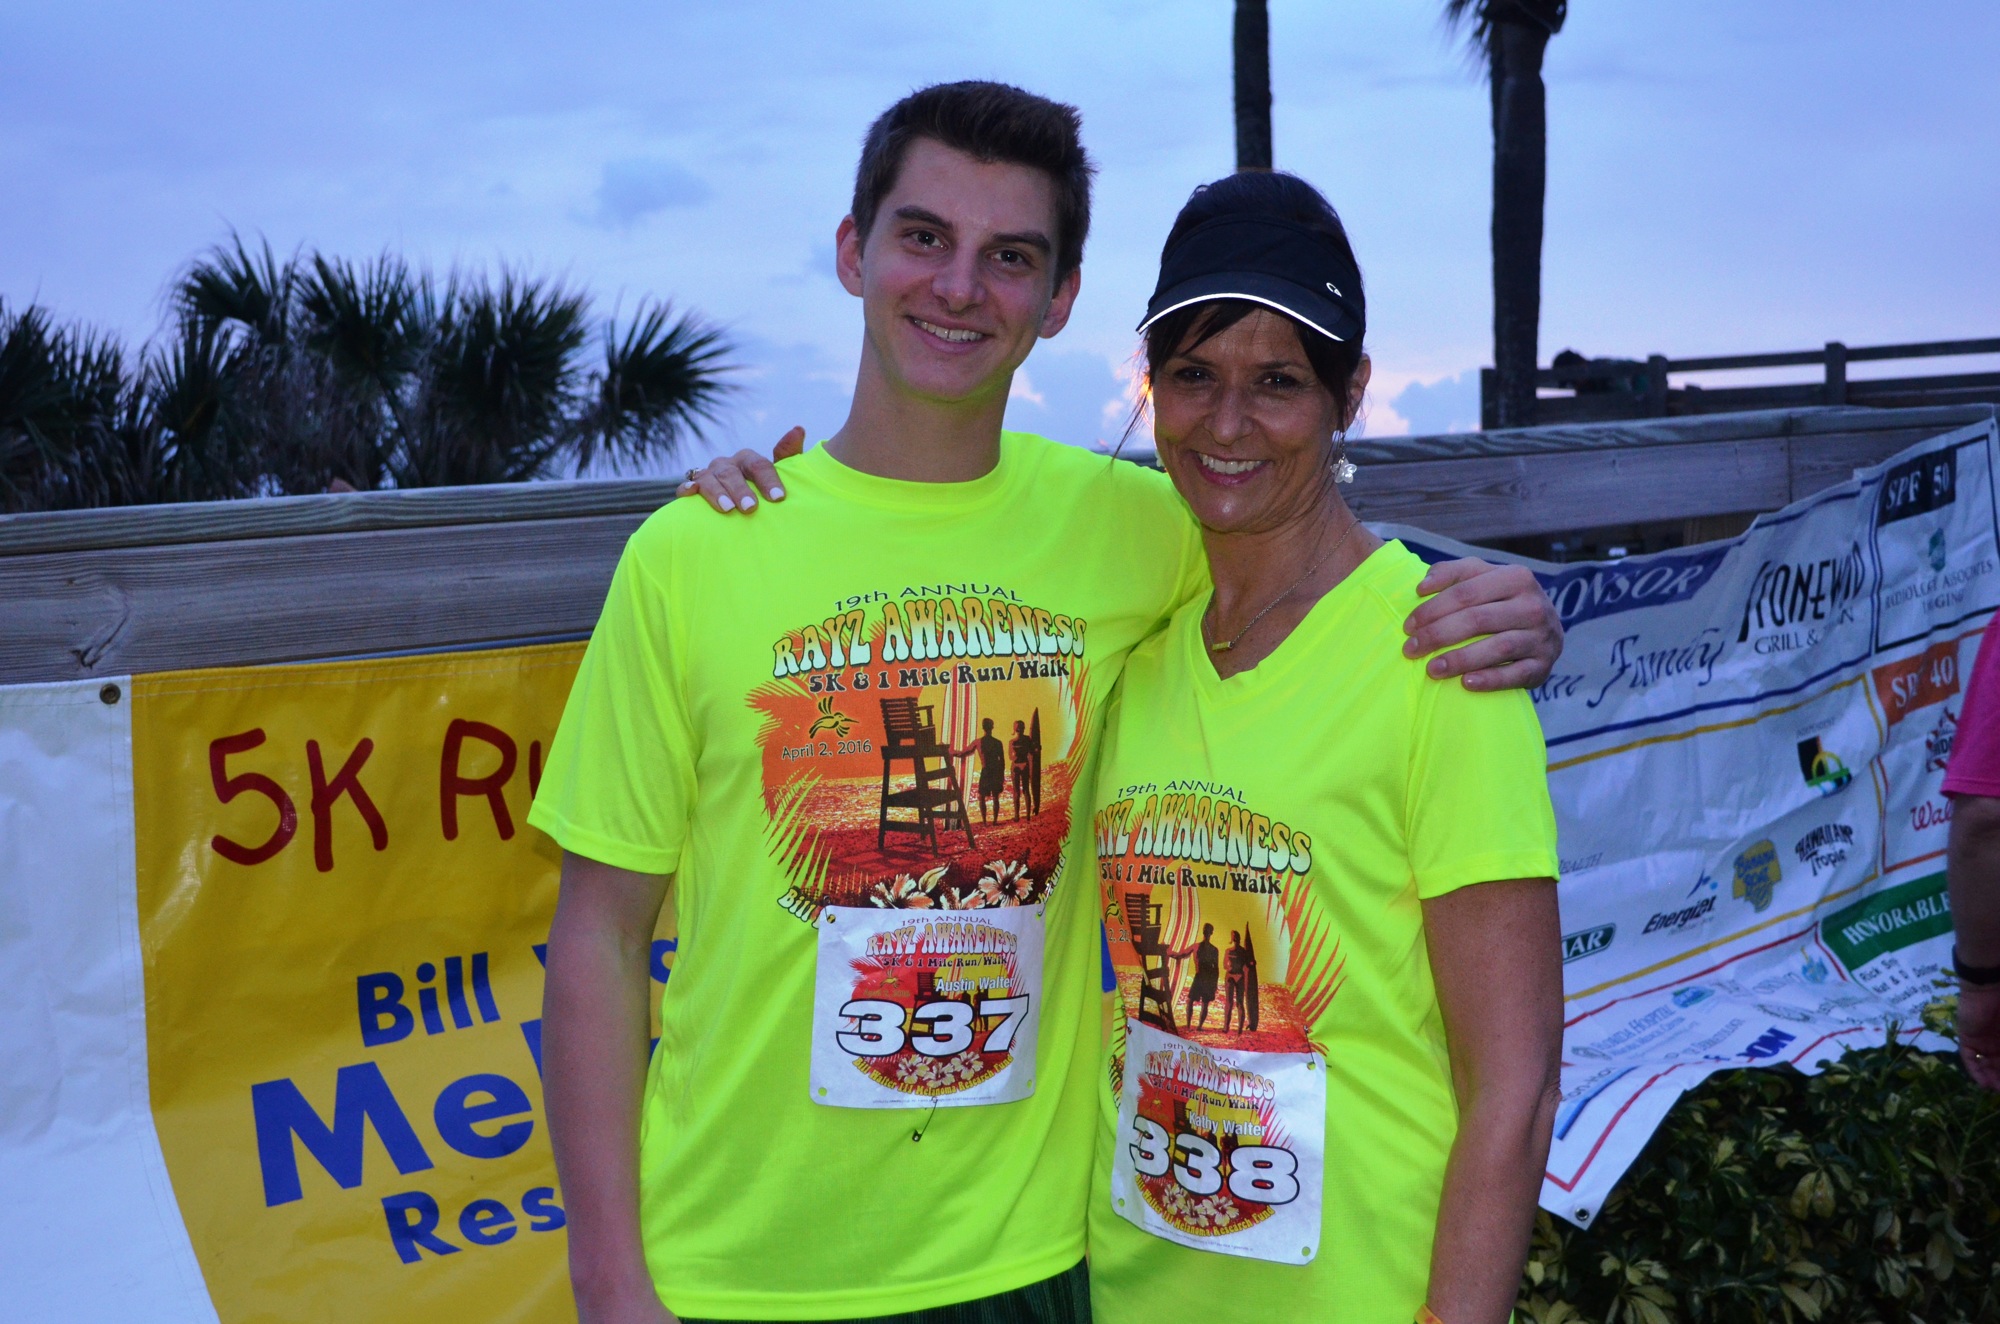 Austin and Kathy Walter, son and widow of Bill Walter III, get ready to run in the RayZ Awareness 5K. Photo by Wayne Grant